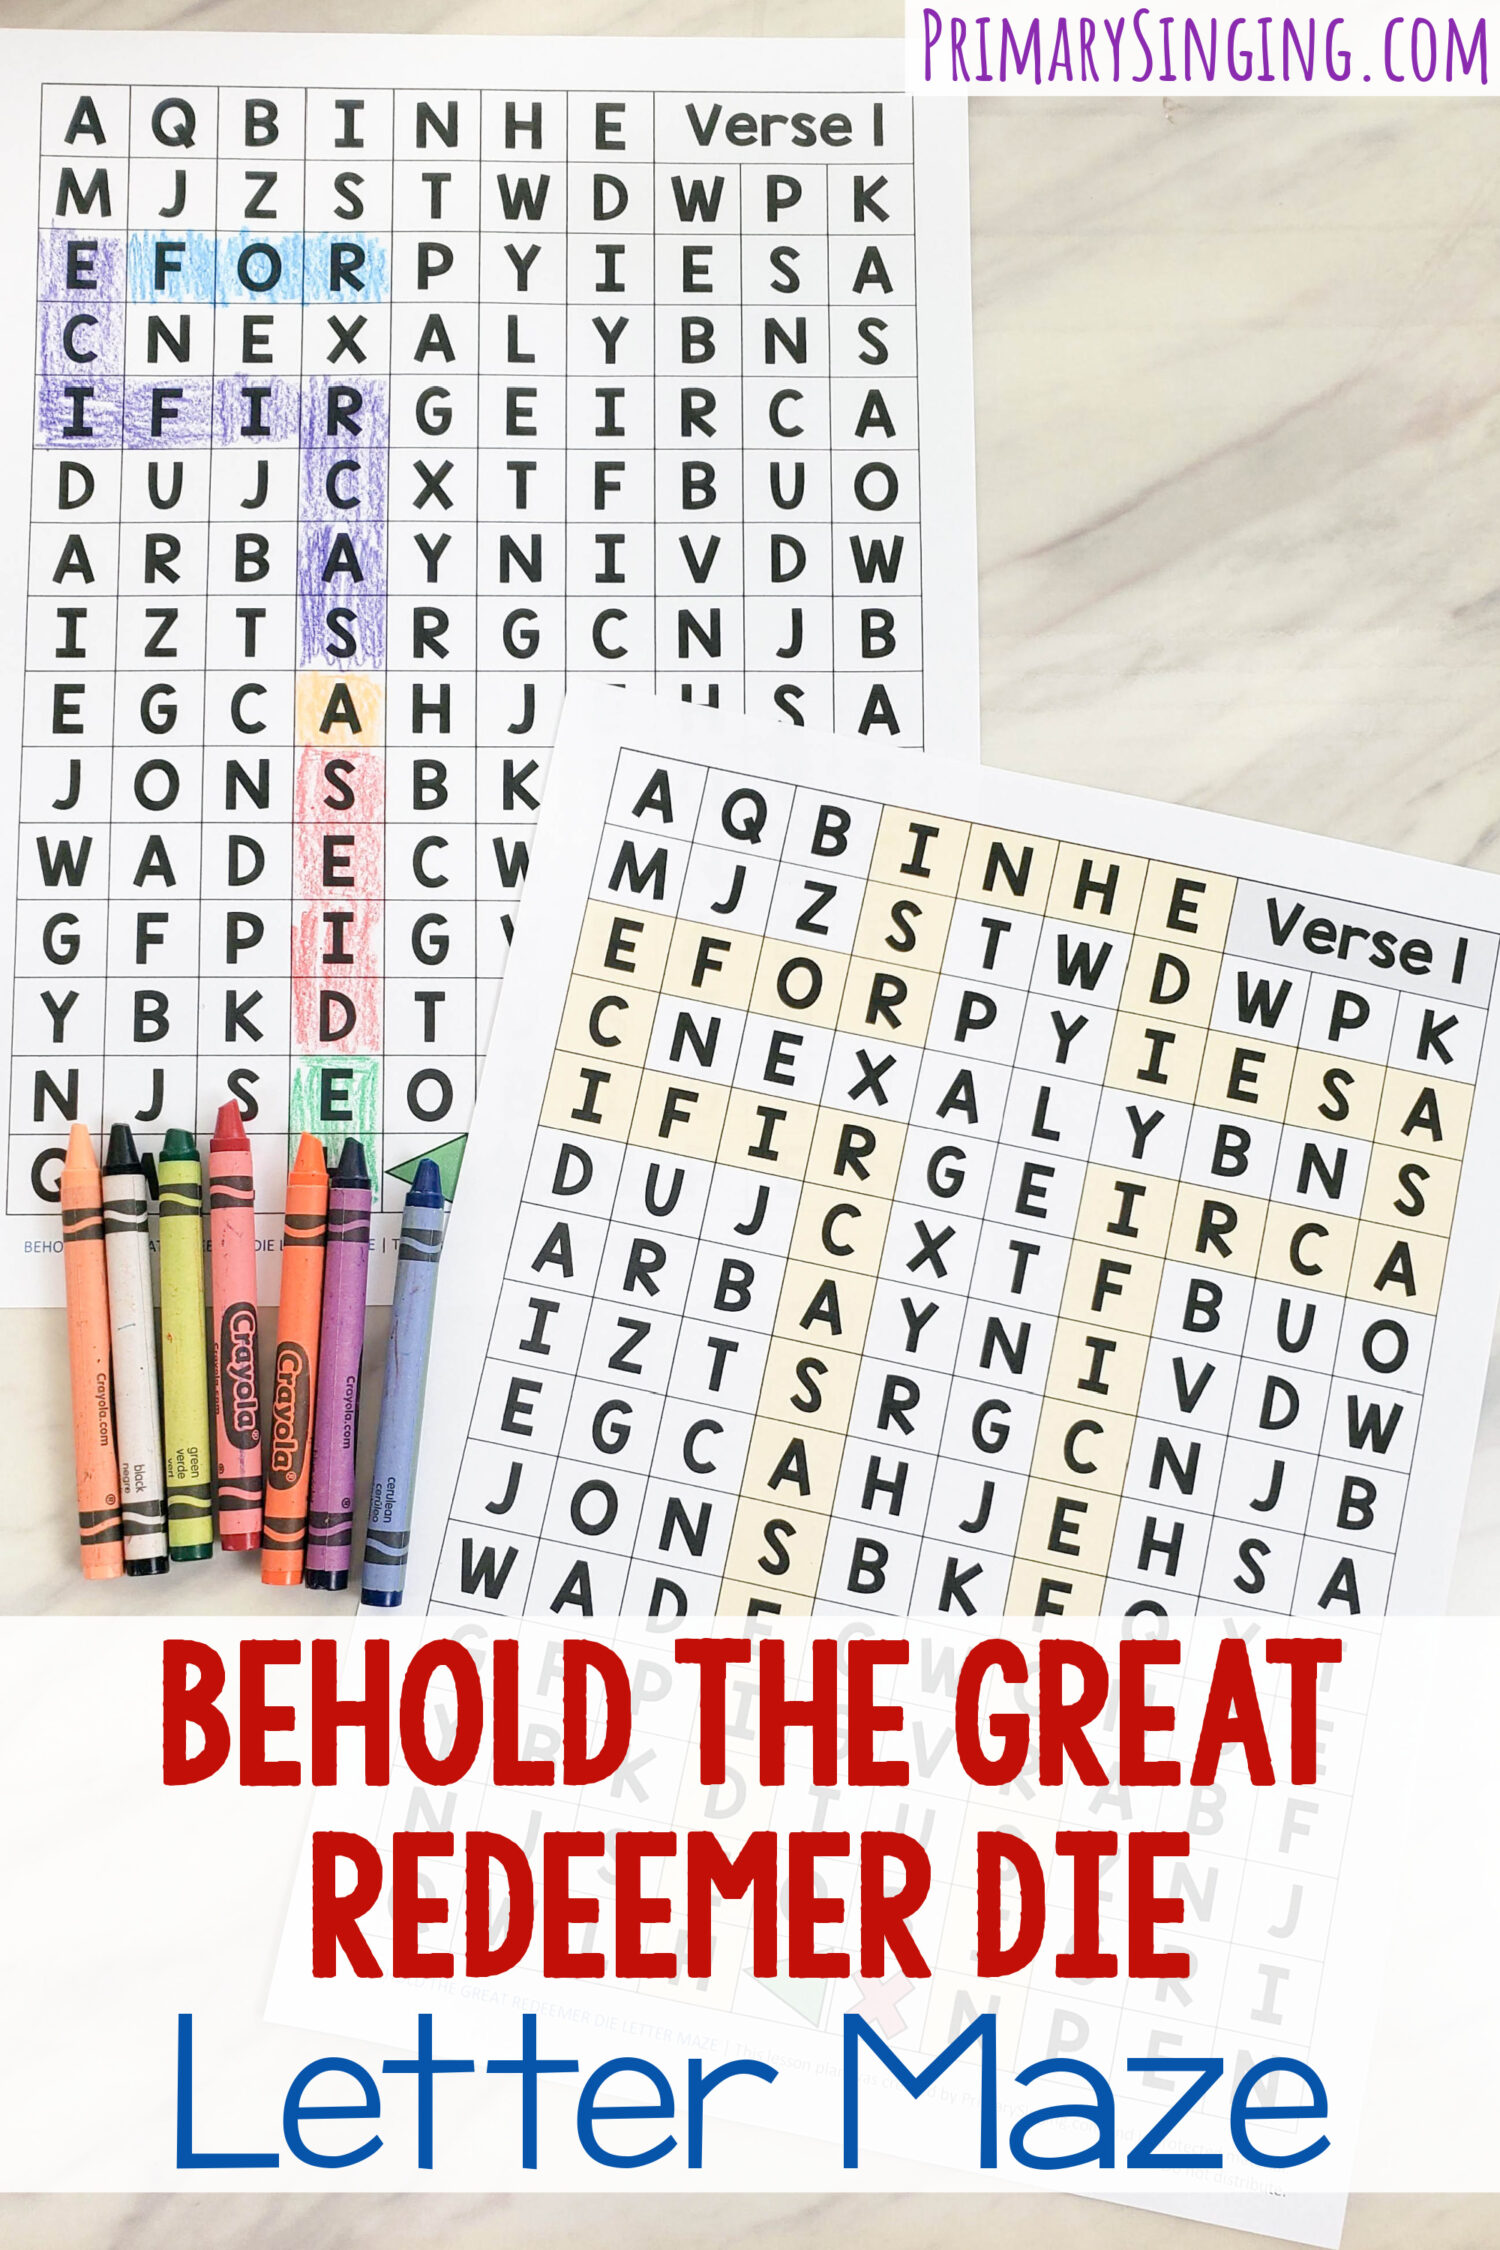 Behold the Great Redeemer Die Letter Maze singing time activity! Use this fun color-in pattern to highlight the repeating phrase of this hymn! Free printable letter maze worksheet for LDS Primary music leaders and families.